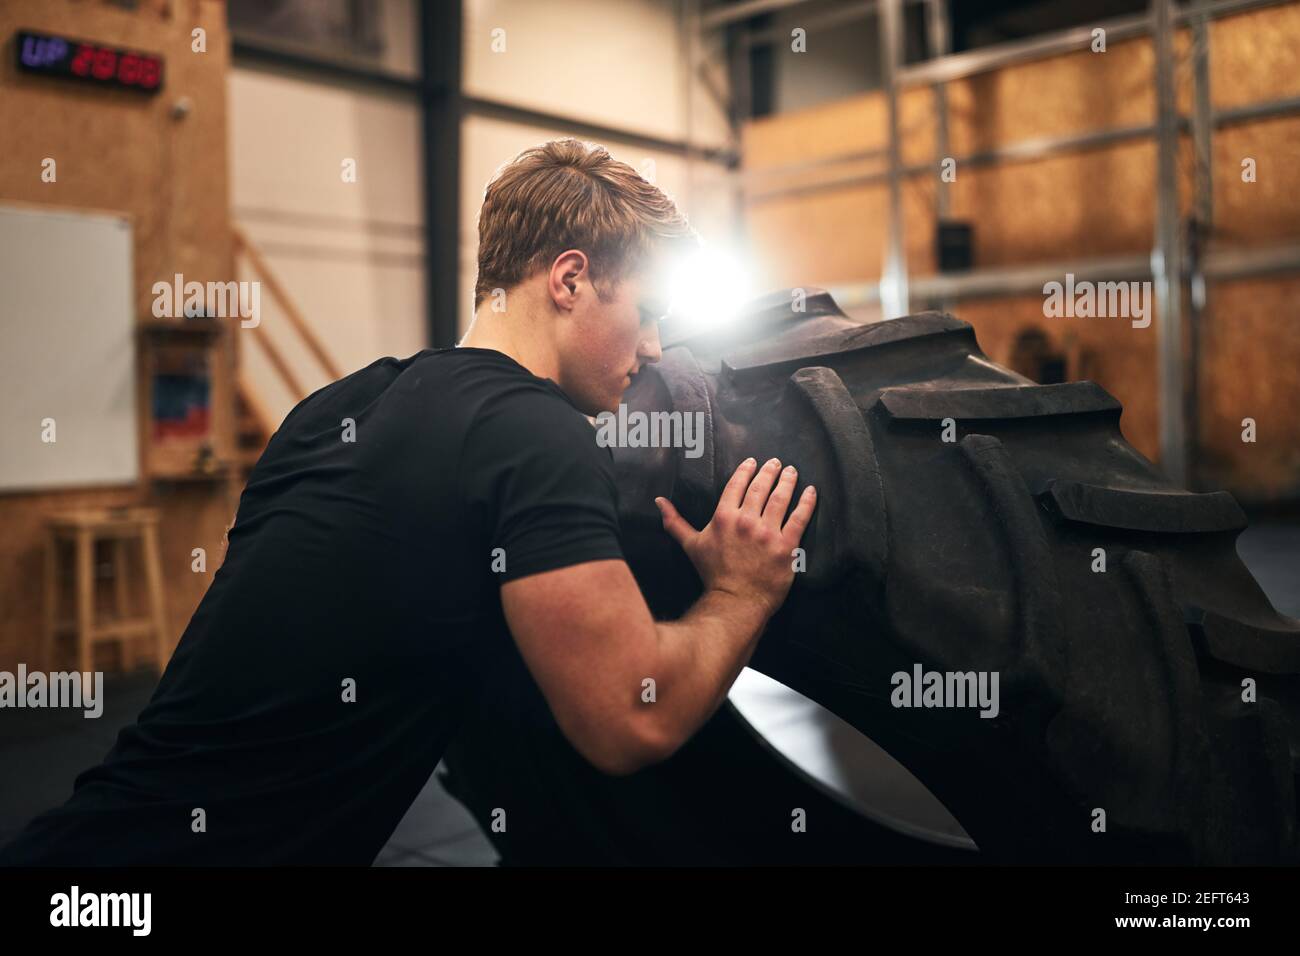 Fit young man in sportswear flipping a heavy tire across a gym during an intense workout at the gym Stock Photo